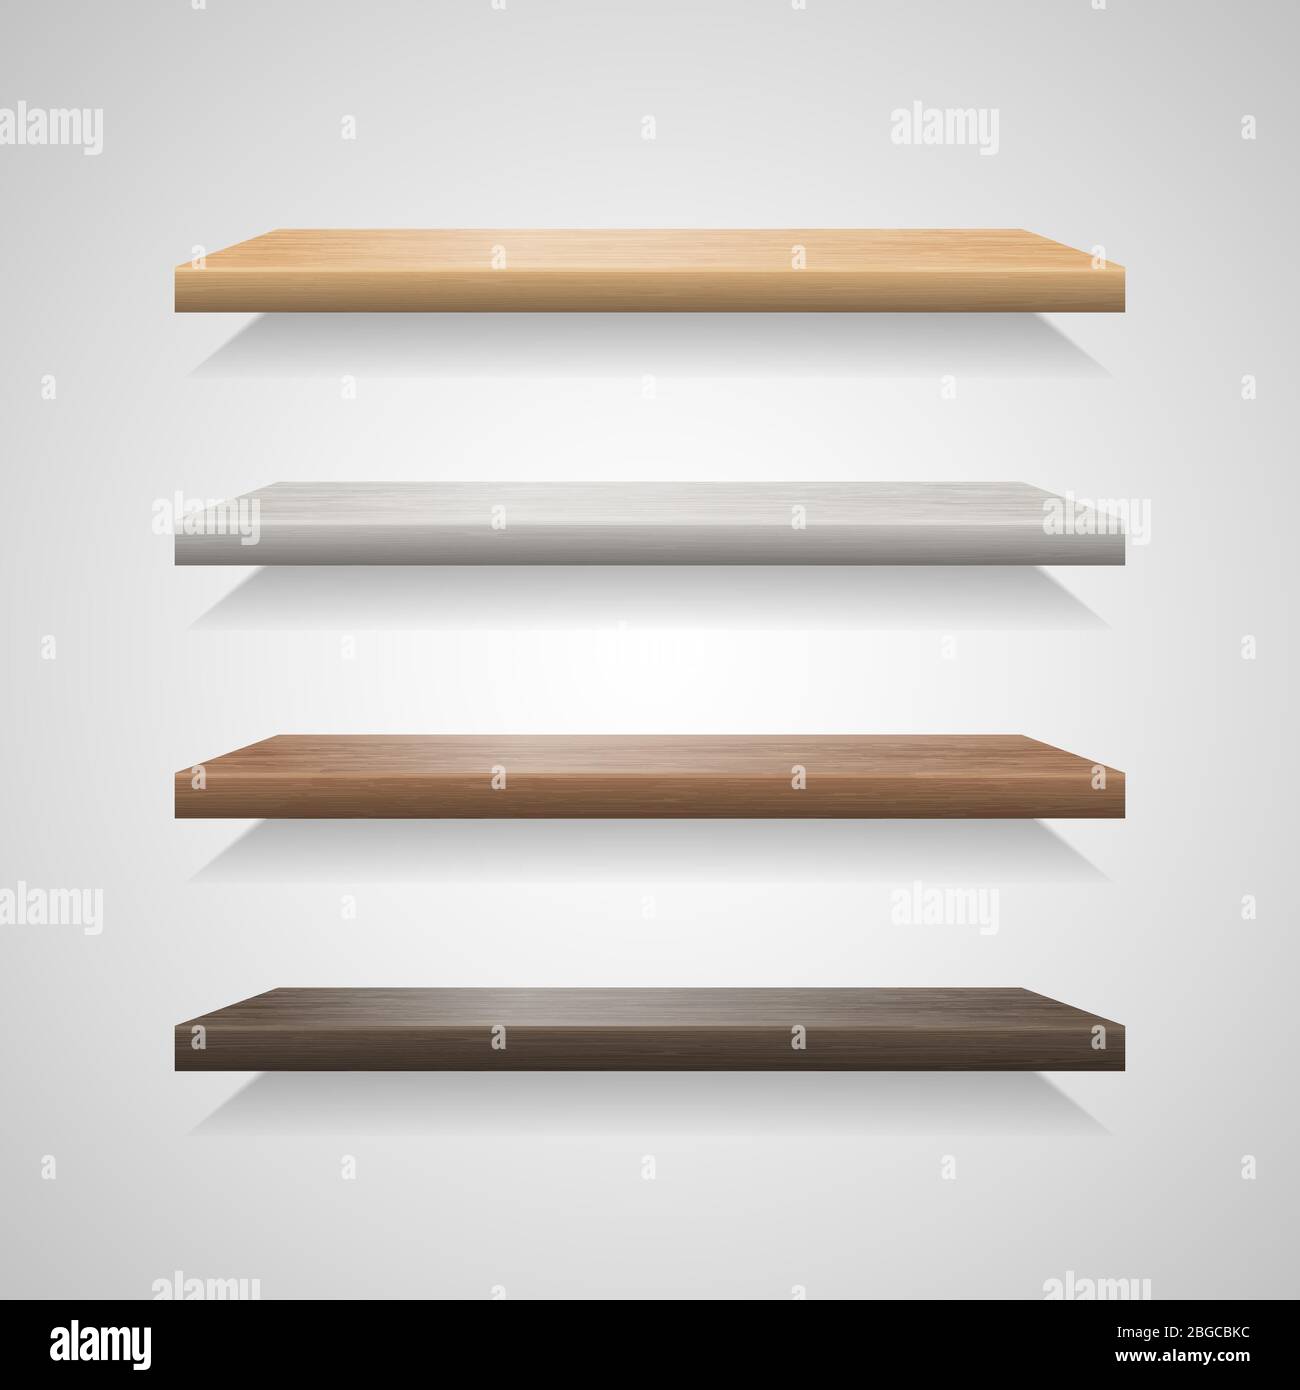 Set of wood shelves on grey background Stock Vector